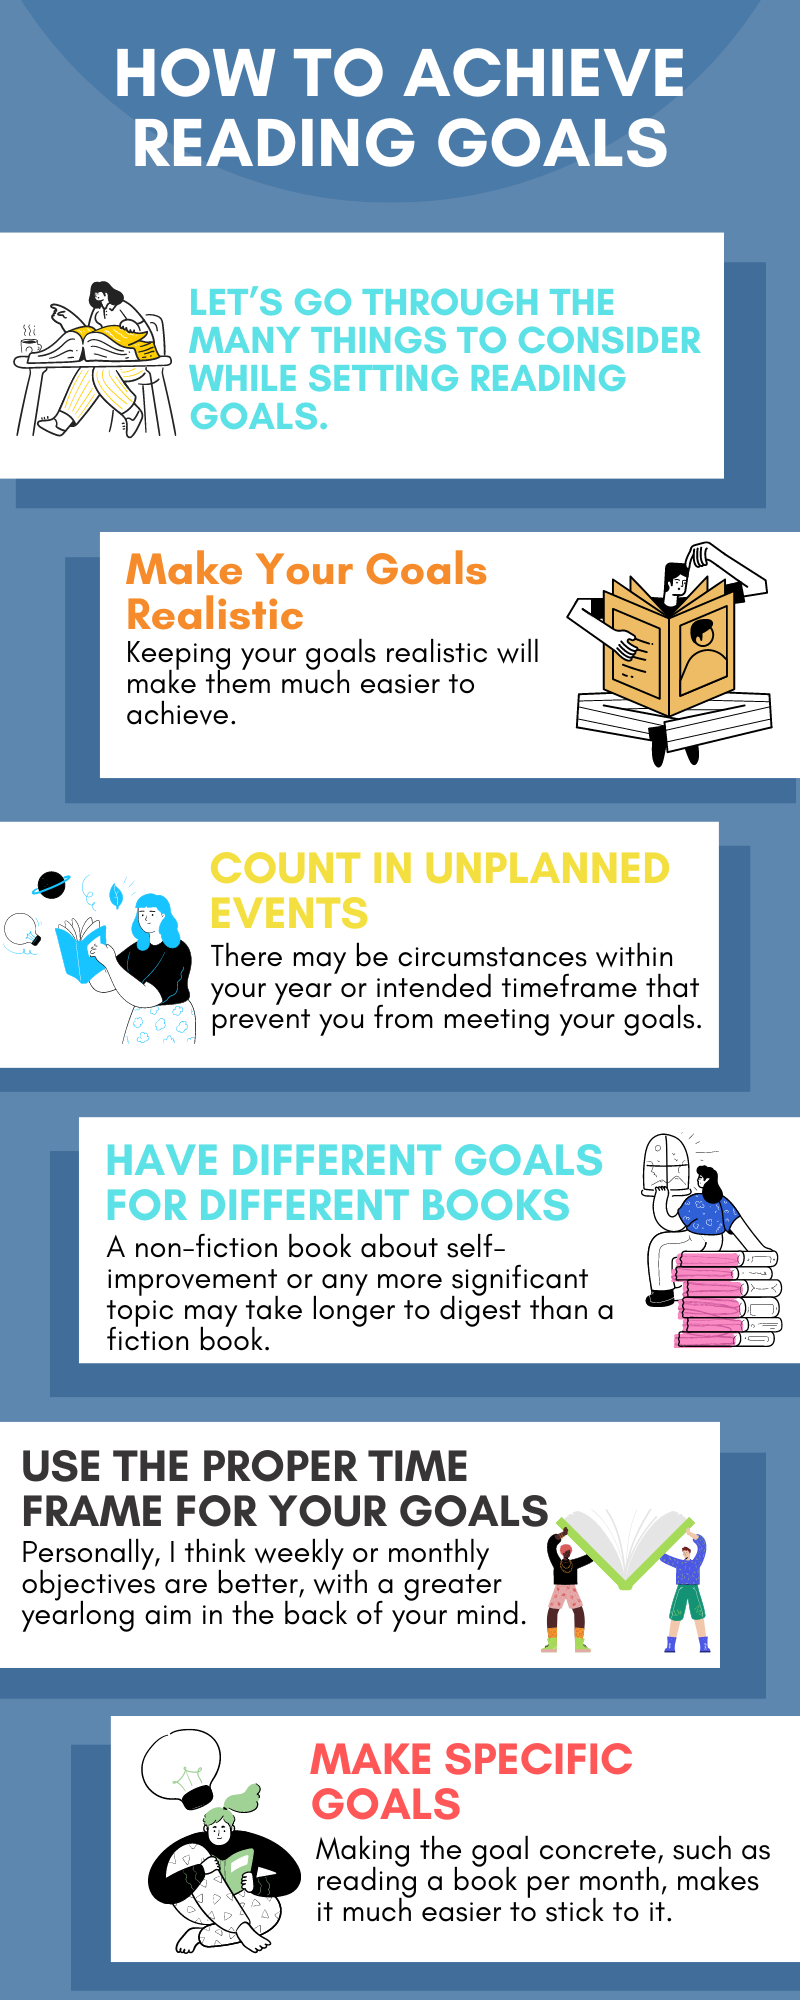 How To Achieve Reading Goals